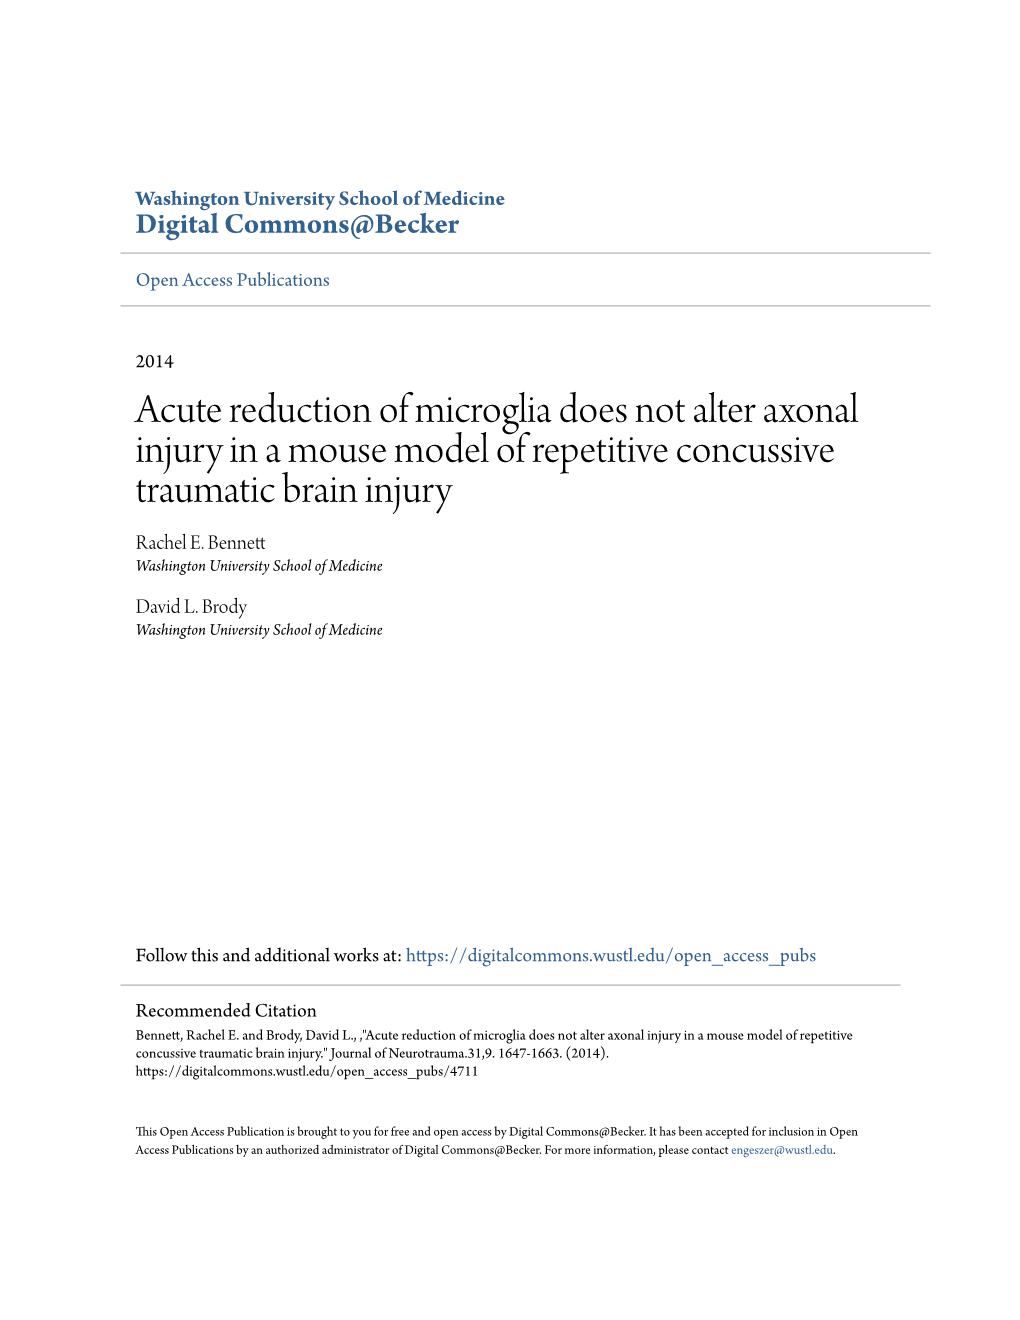 Acute Reduction of Microglia Does Not Alter Axonal Injury in a Mouse Model of Repetitive Concussive Traumatic Brain Injury Rachel E